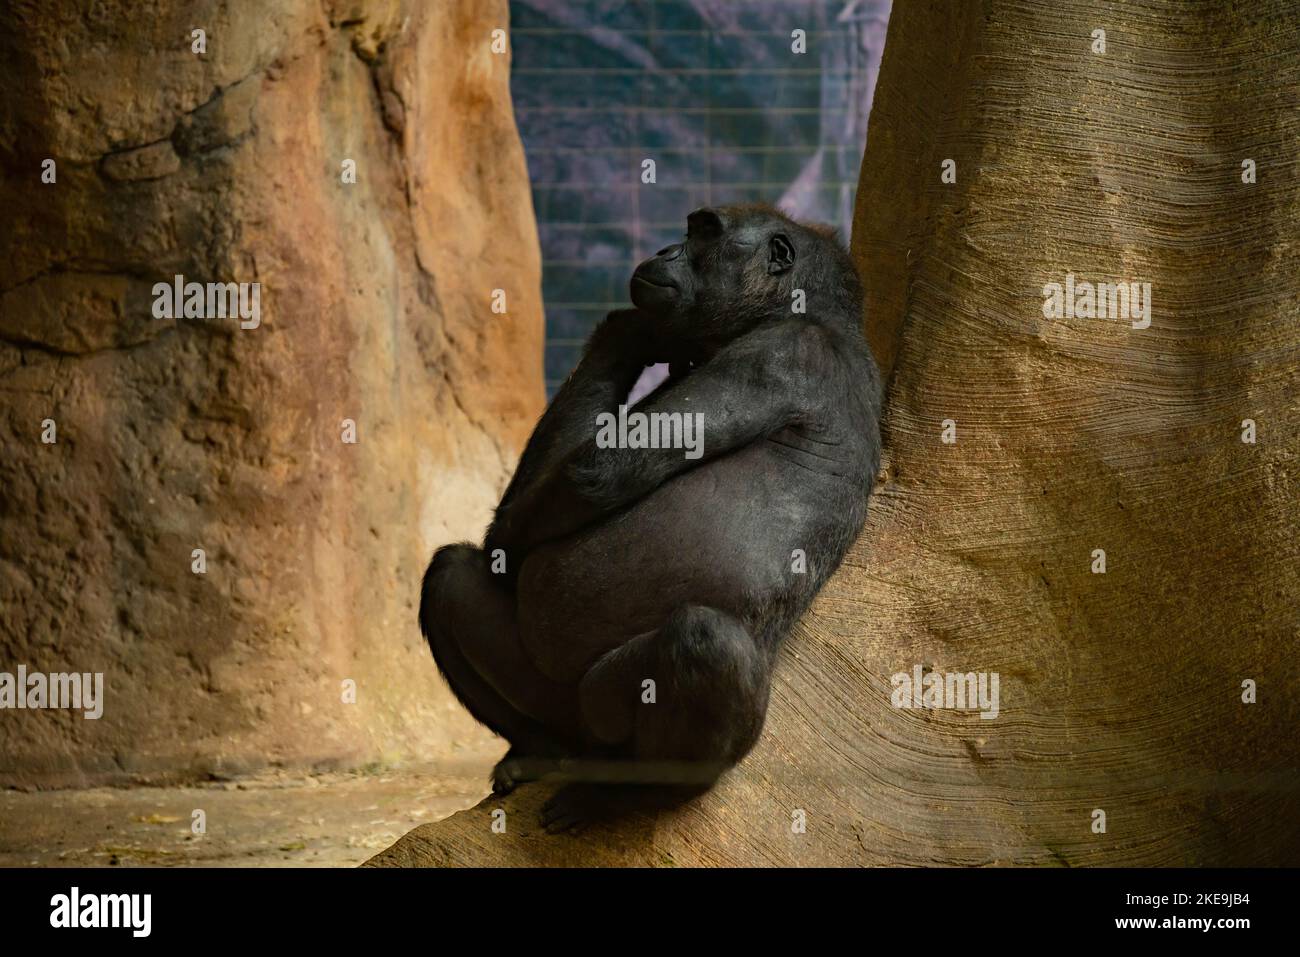 Black Gorilla Sits Leaning Against Stone Wall And Looks Thoughtfully In Other Direction. He Props His Muzzle With His Paw And Sighs Heavily. Stock Photo